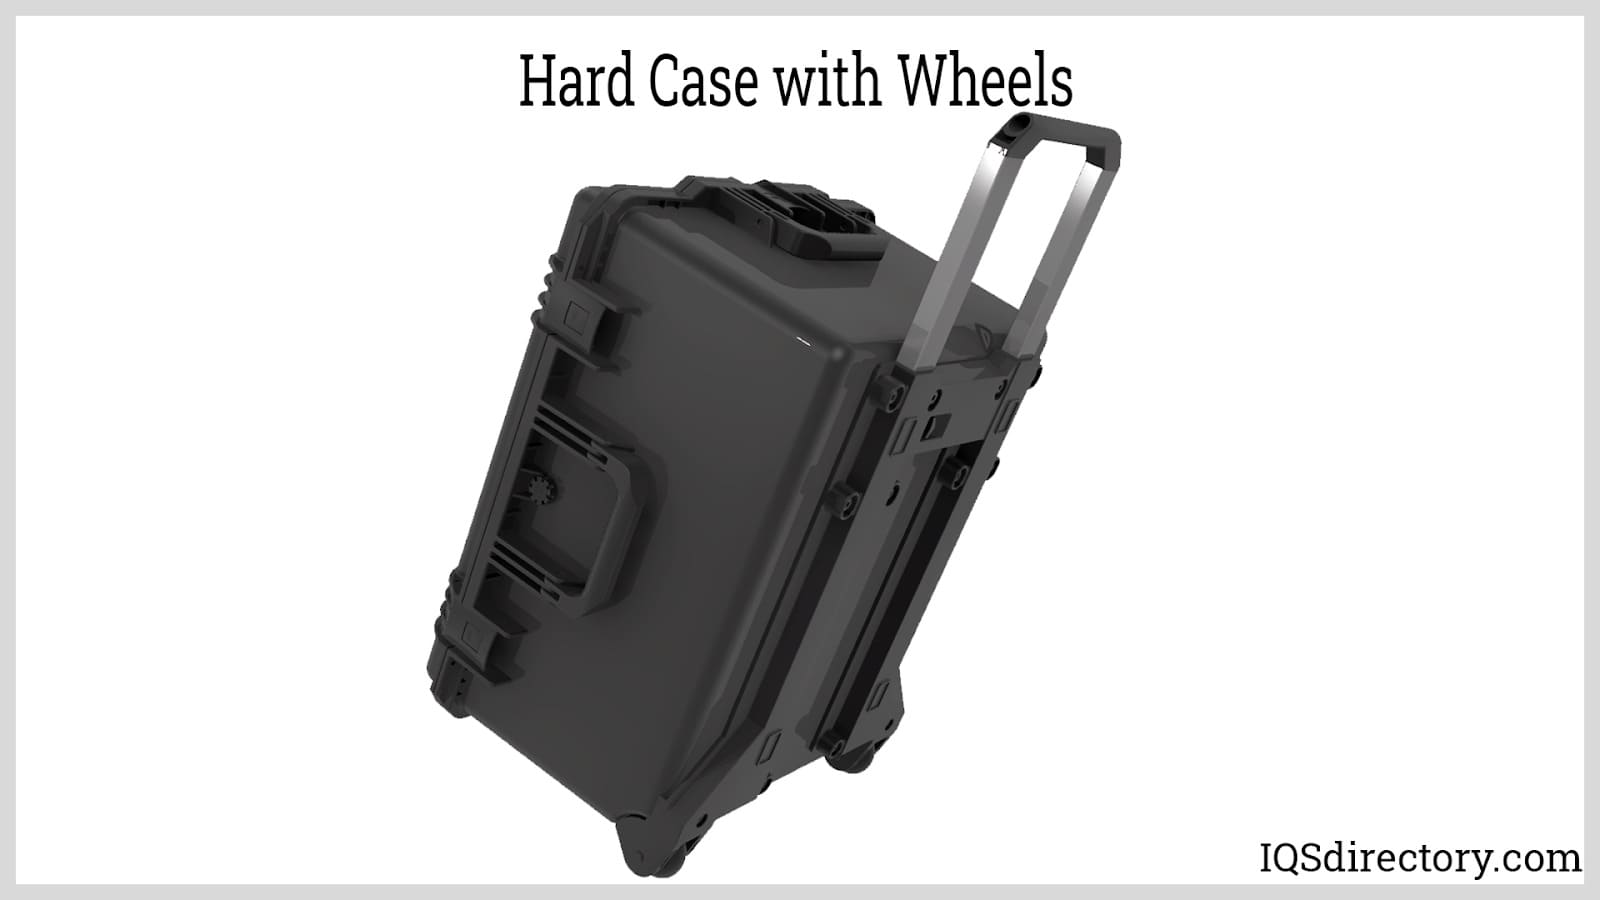 Hard Case with Wheels